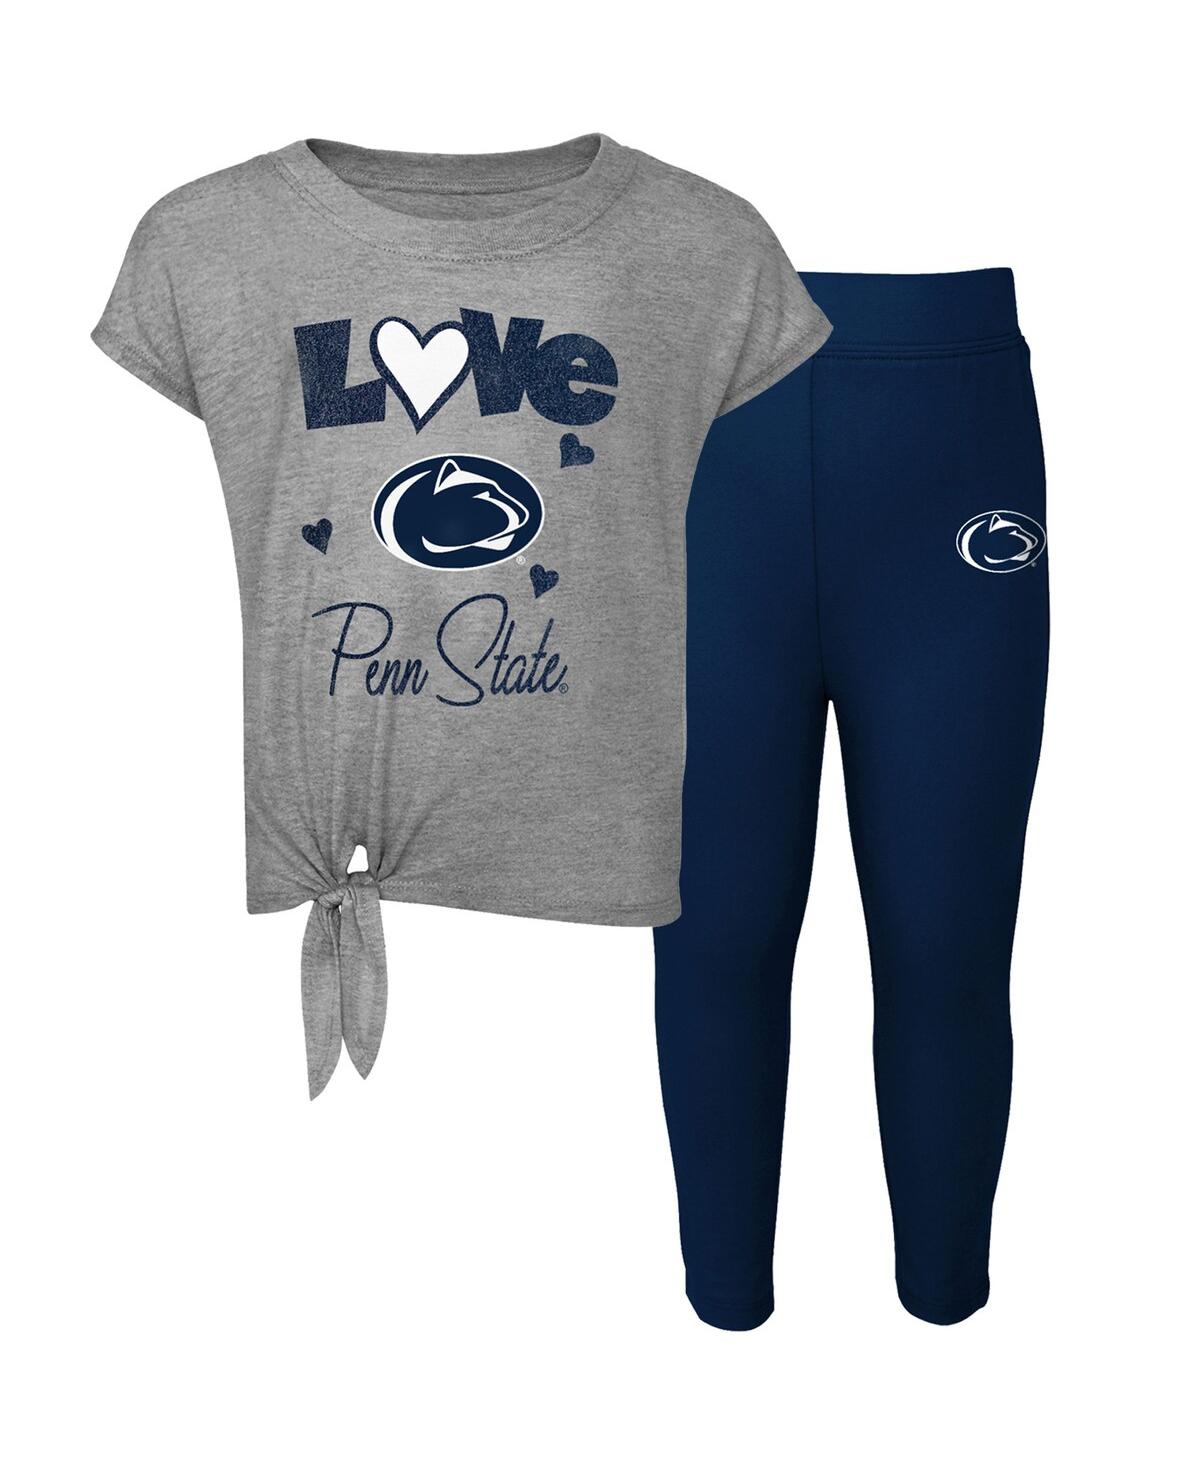 Outerstuff Babies' Little Boys And Girls Heathered Gray, Navy Penn State Nittany Lions Forever Love T-shirt And Legging In Heathered Gray,navy